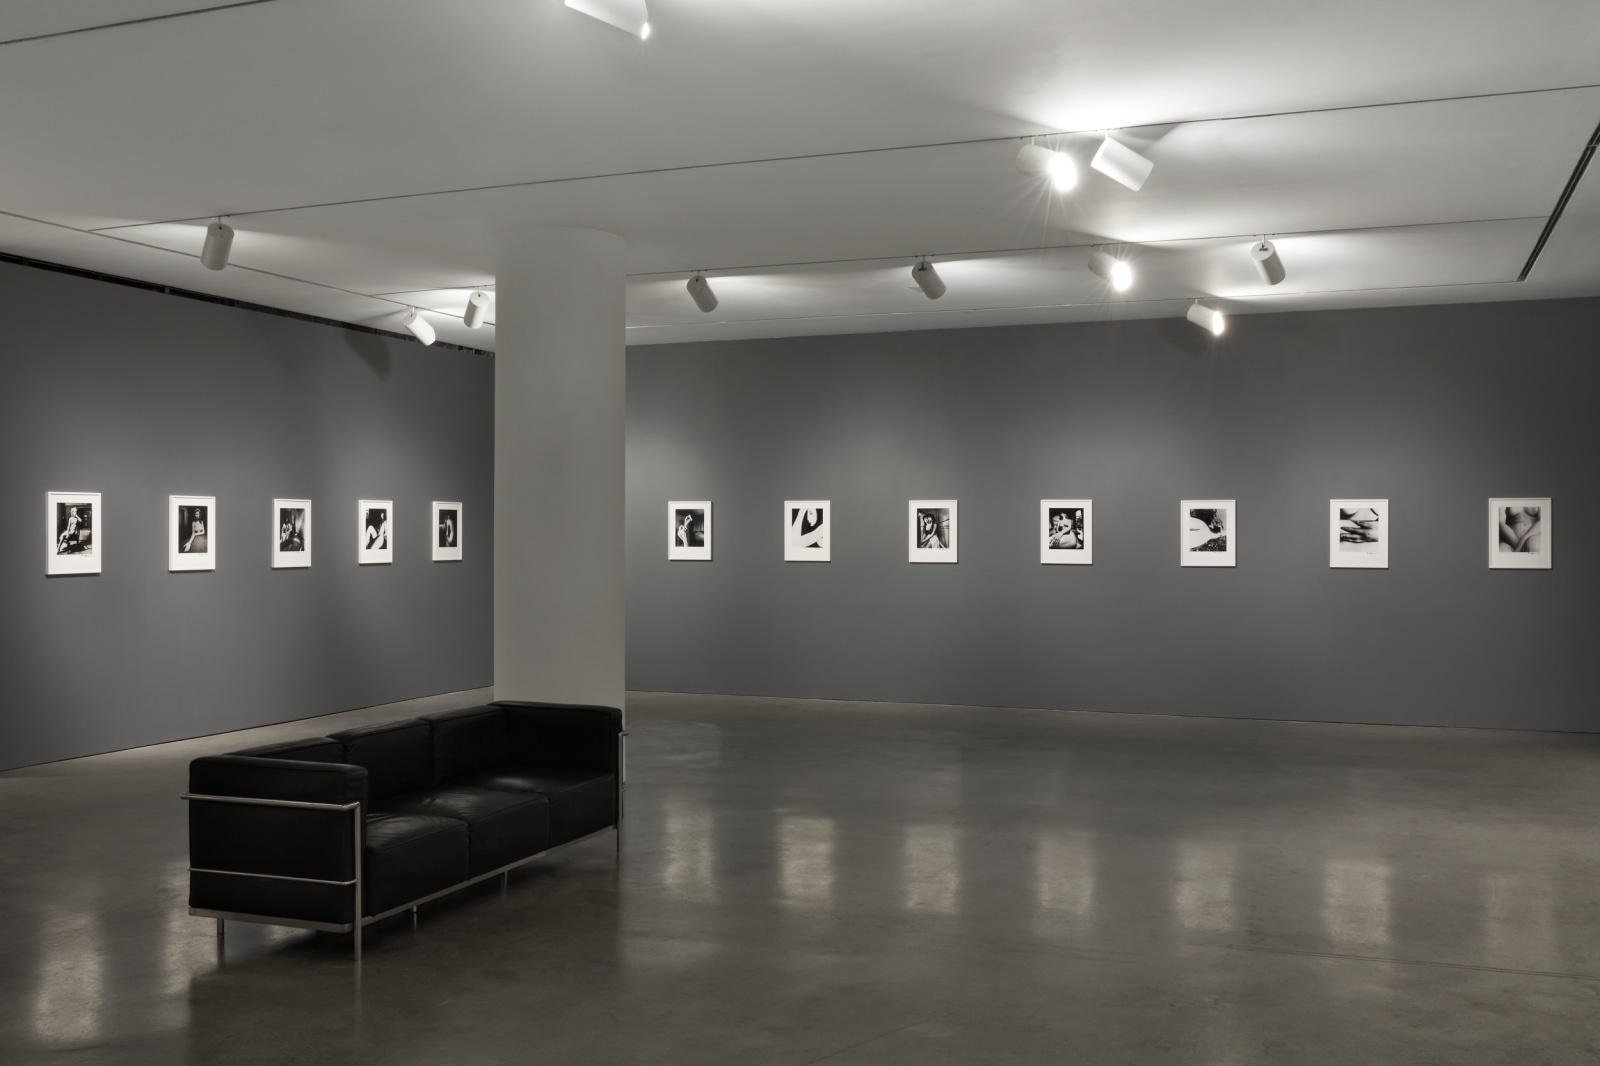 Installation view of photographs by Bills Brandt, works are in white frames of a gray wall. 